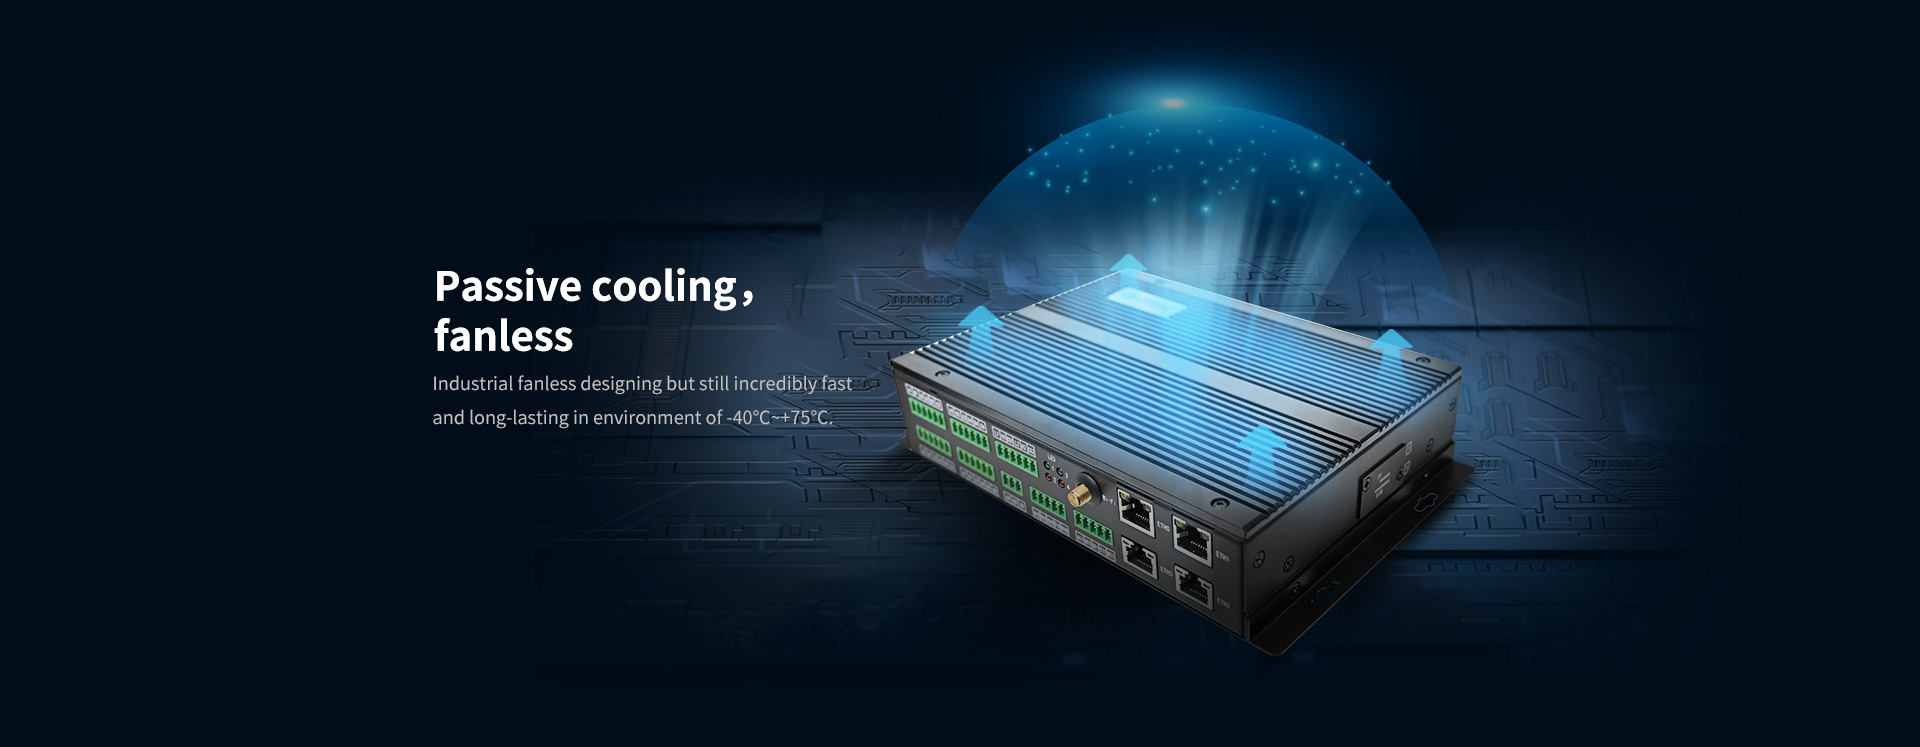 FCU2601 Embedded Computer Passive cooling fanless